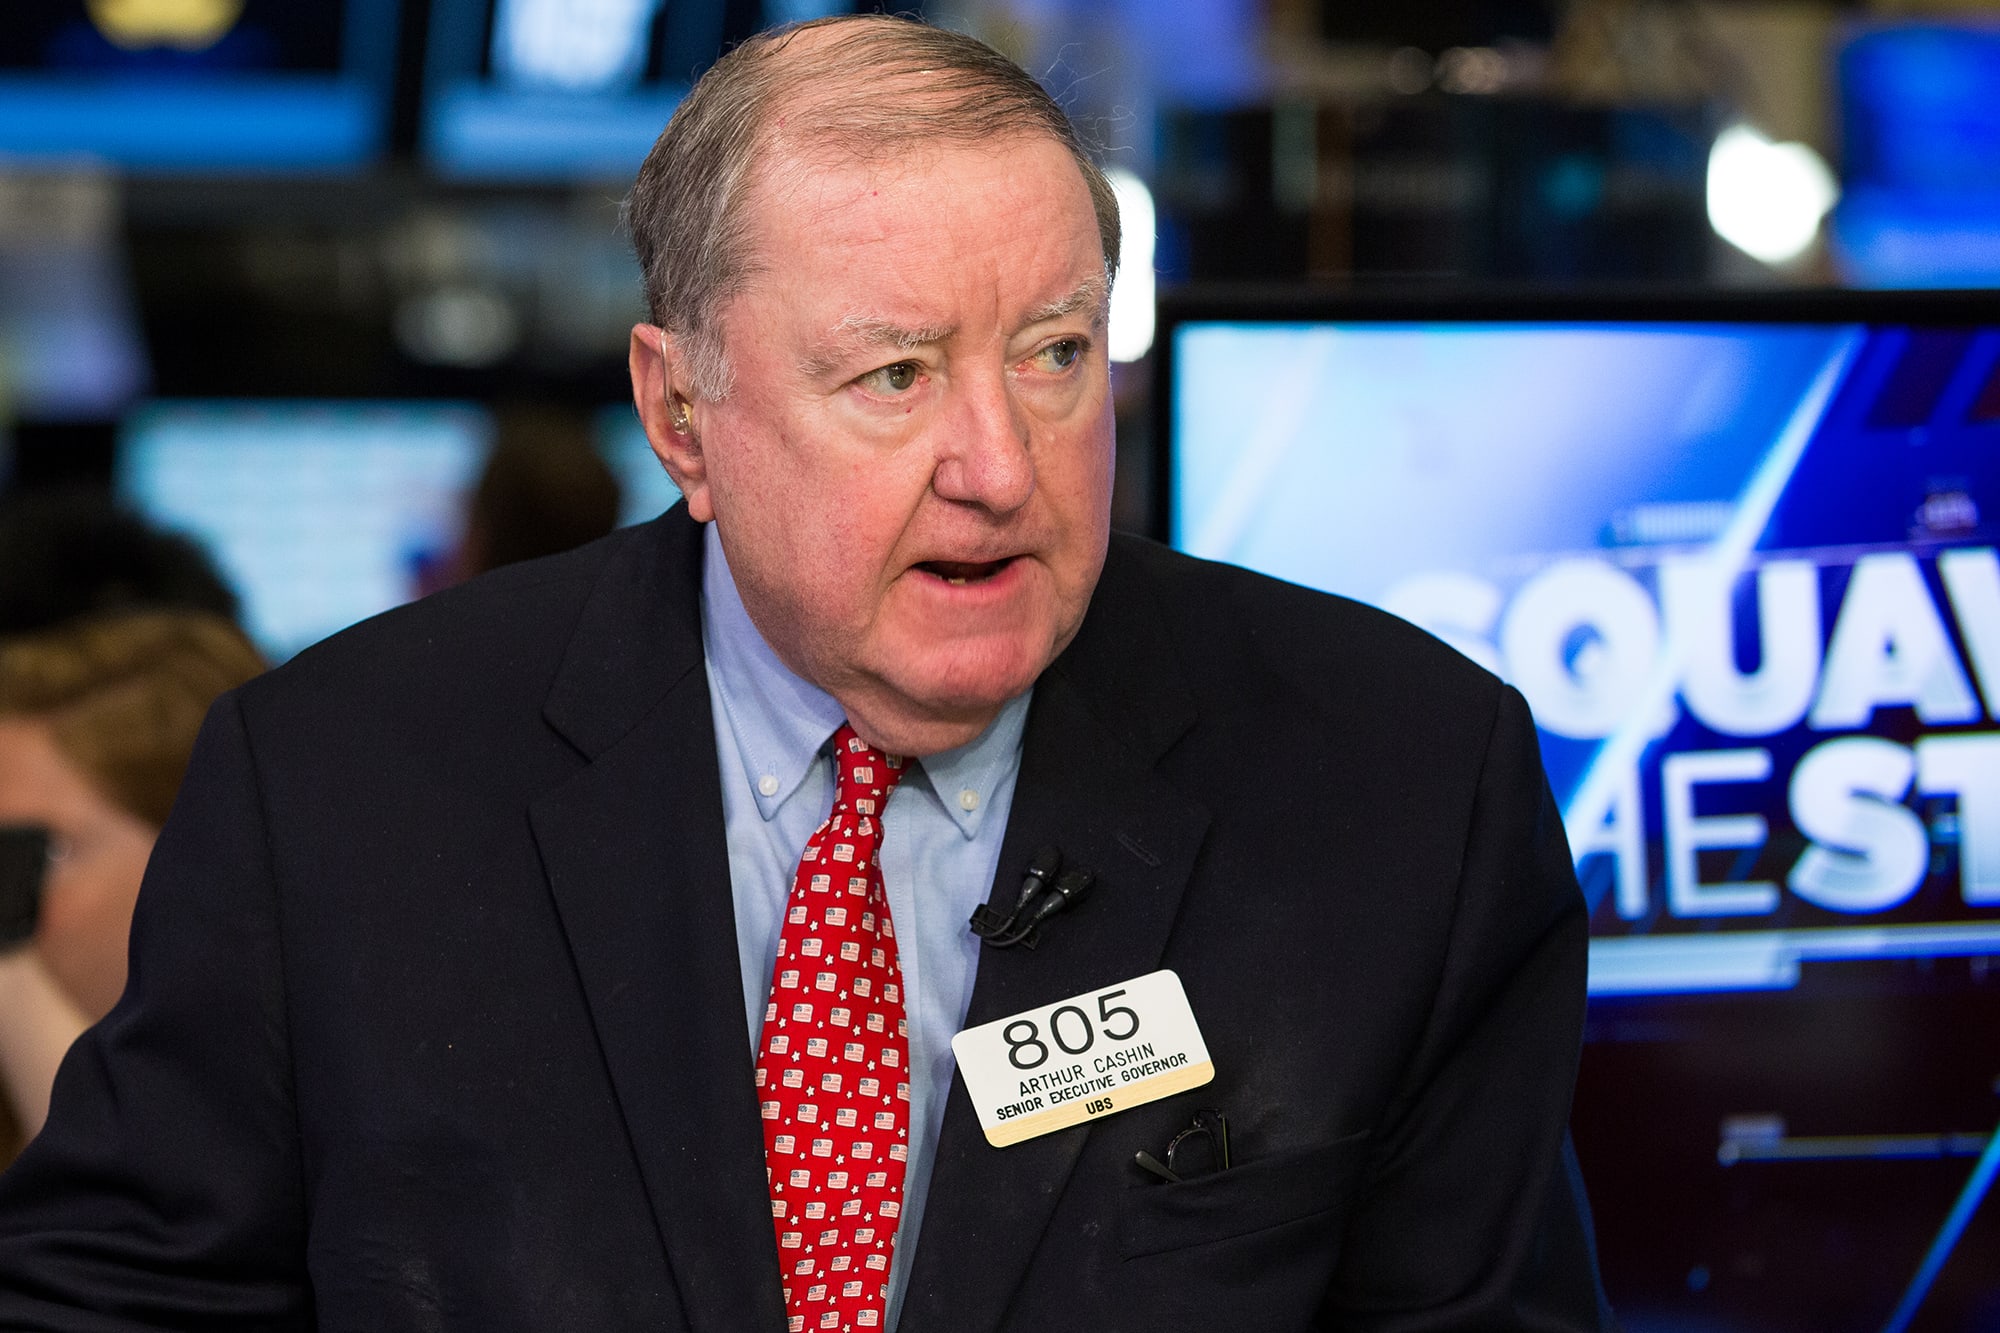 I think Trump has learned his lesson after market volatility, says Art Cashin